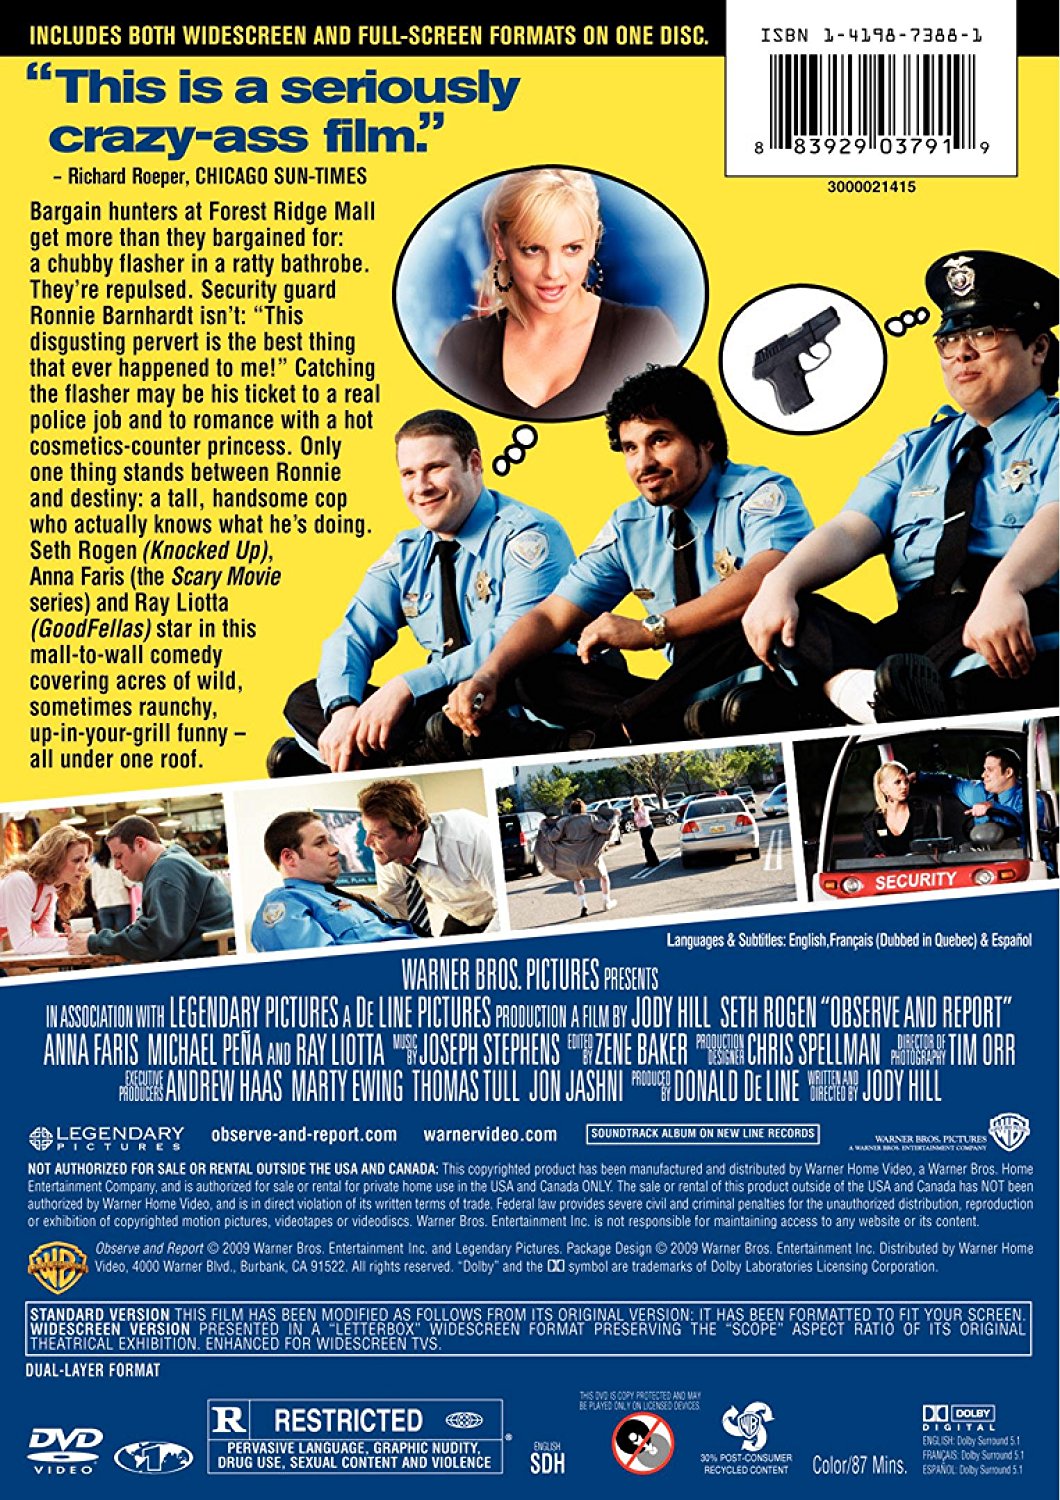 Observe And Report Backgrounds, Compatible - PC, Mobile, Gadgets| 1060x1500 px